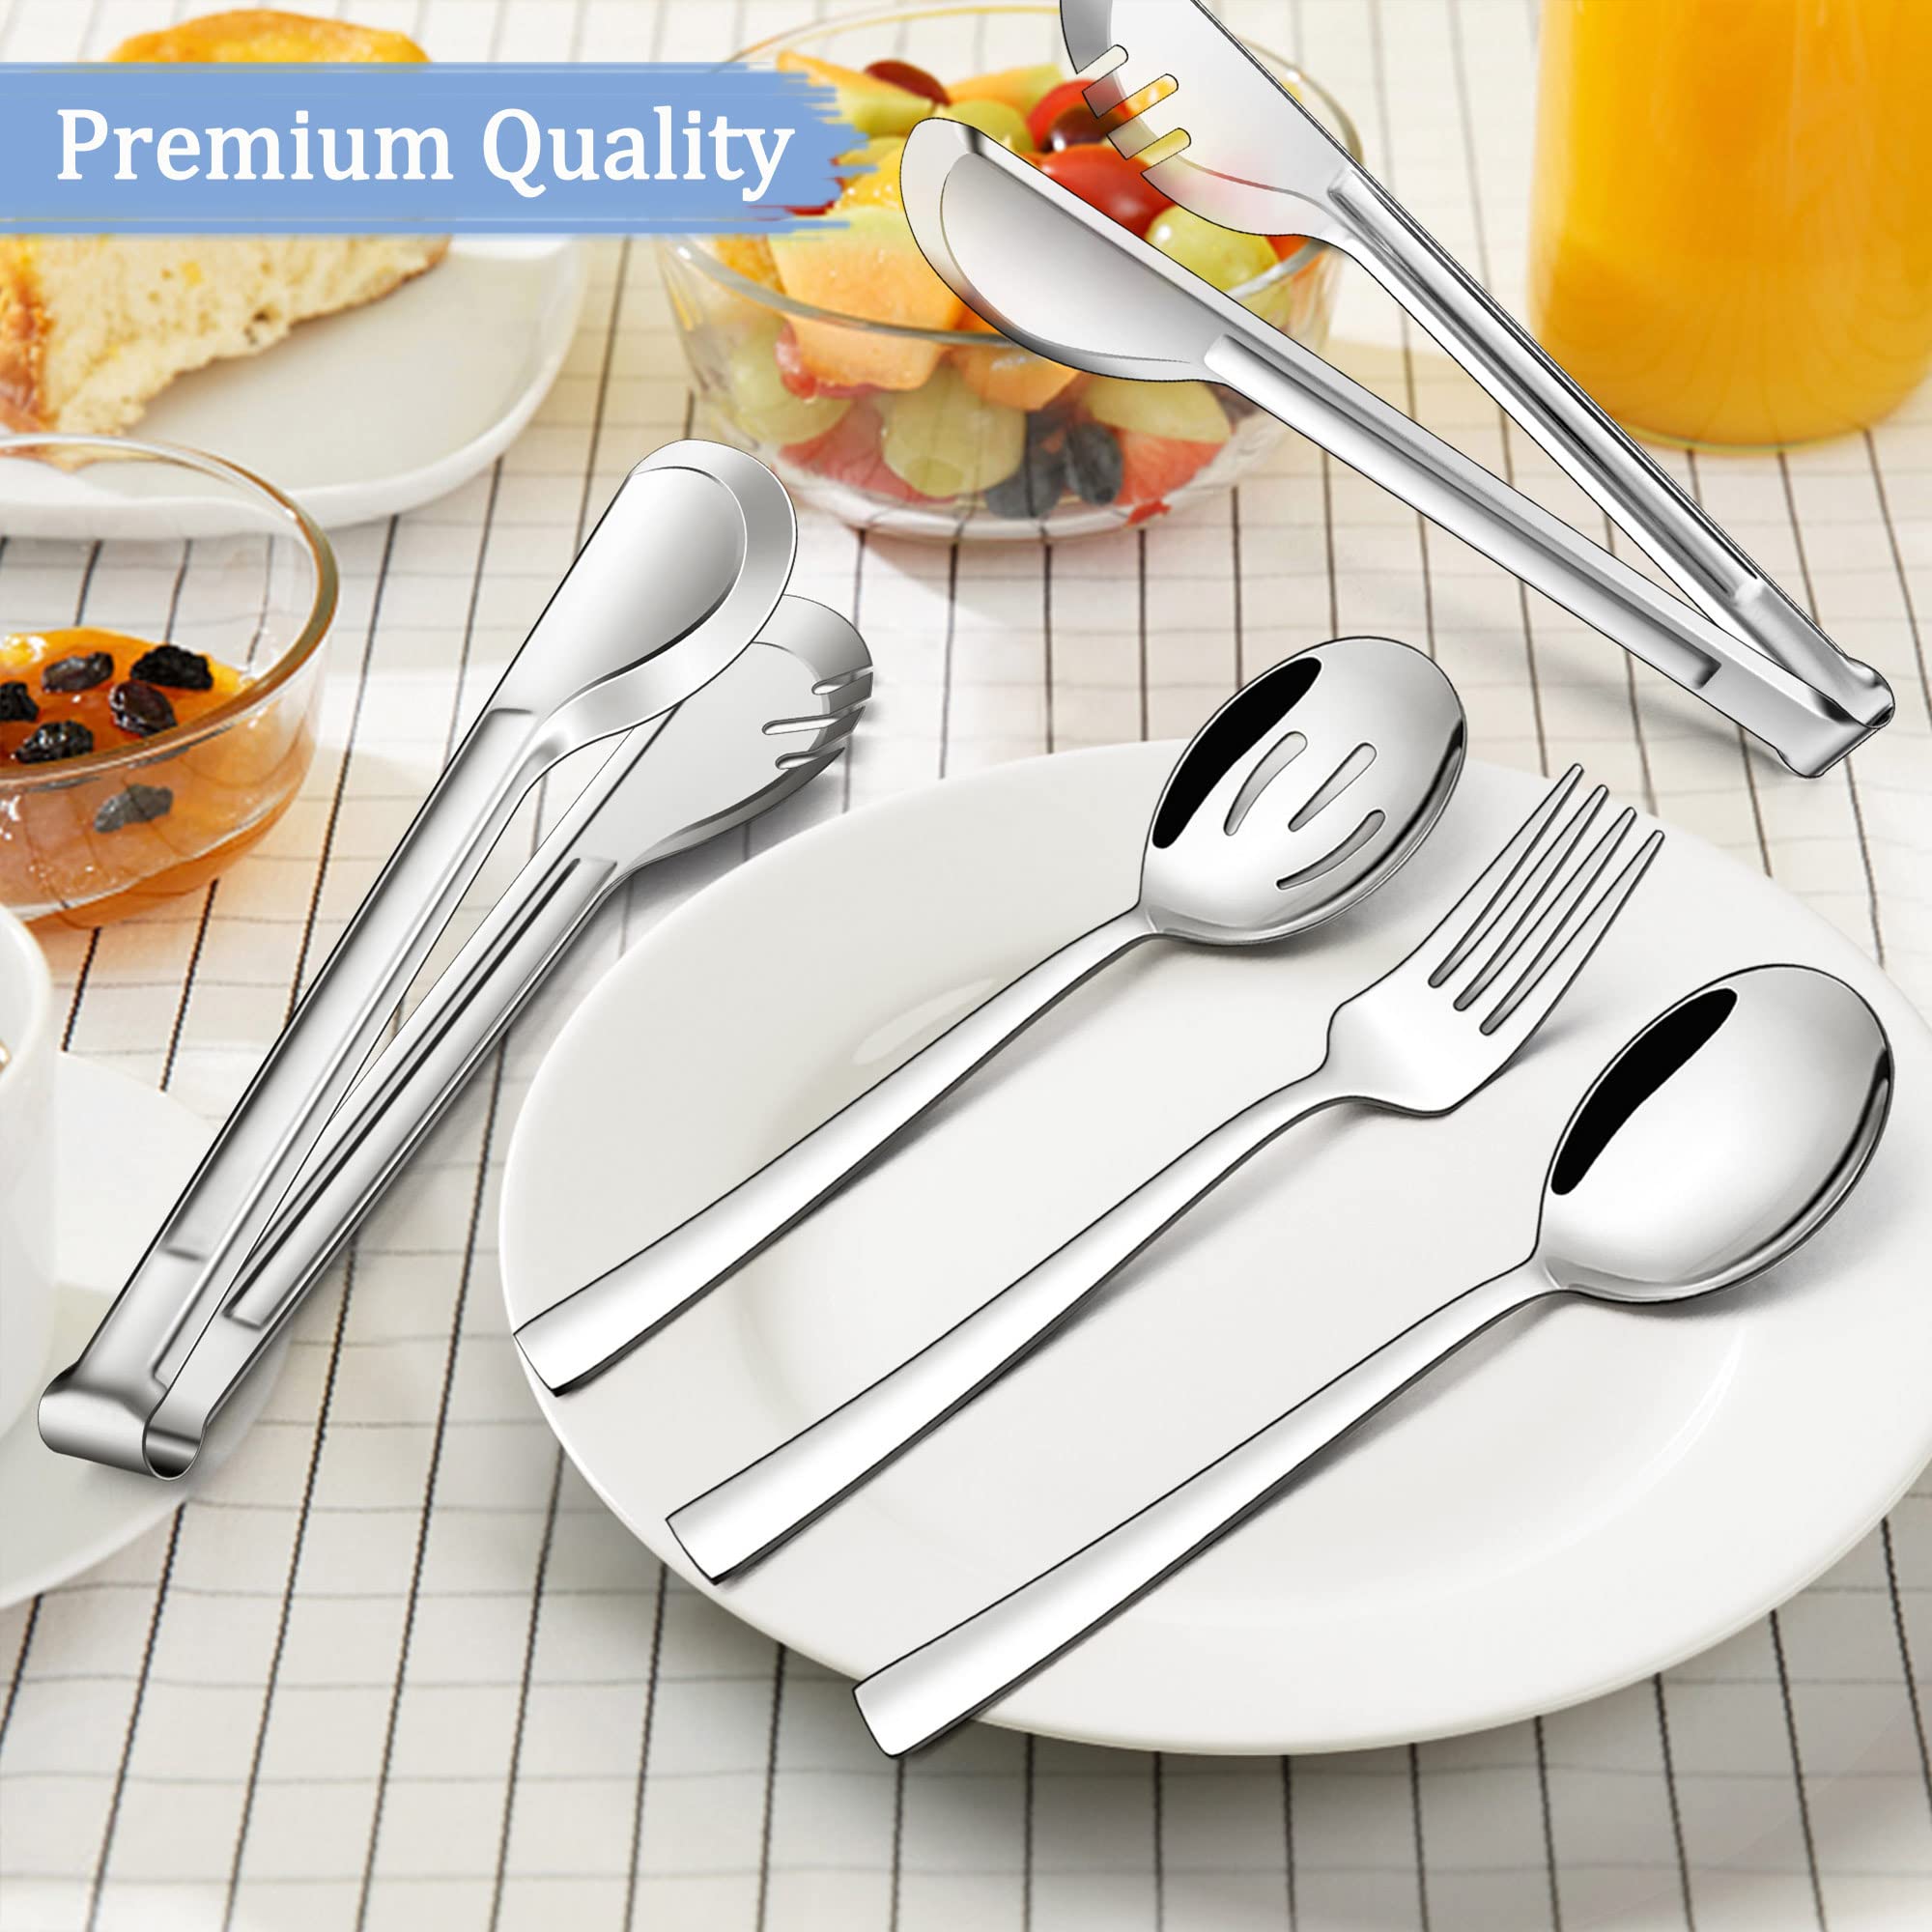 LIANYU Serving Utensils, Stainless Steel Serving Spoons Set of 8, Include 2 Serving Spoons, 2 Slotted Spoons, 2 Serving Forks, 2 Metal Tongs for Kitchen Buffet Party Banquet Entertaining